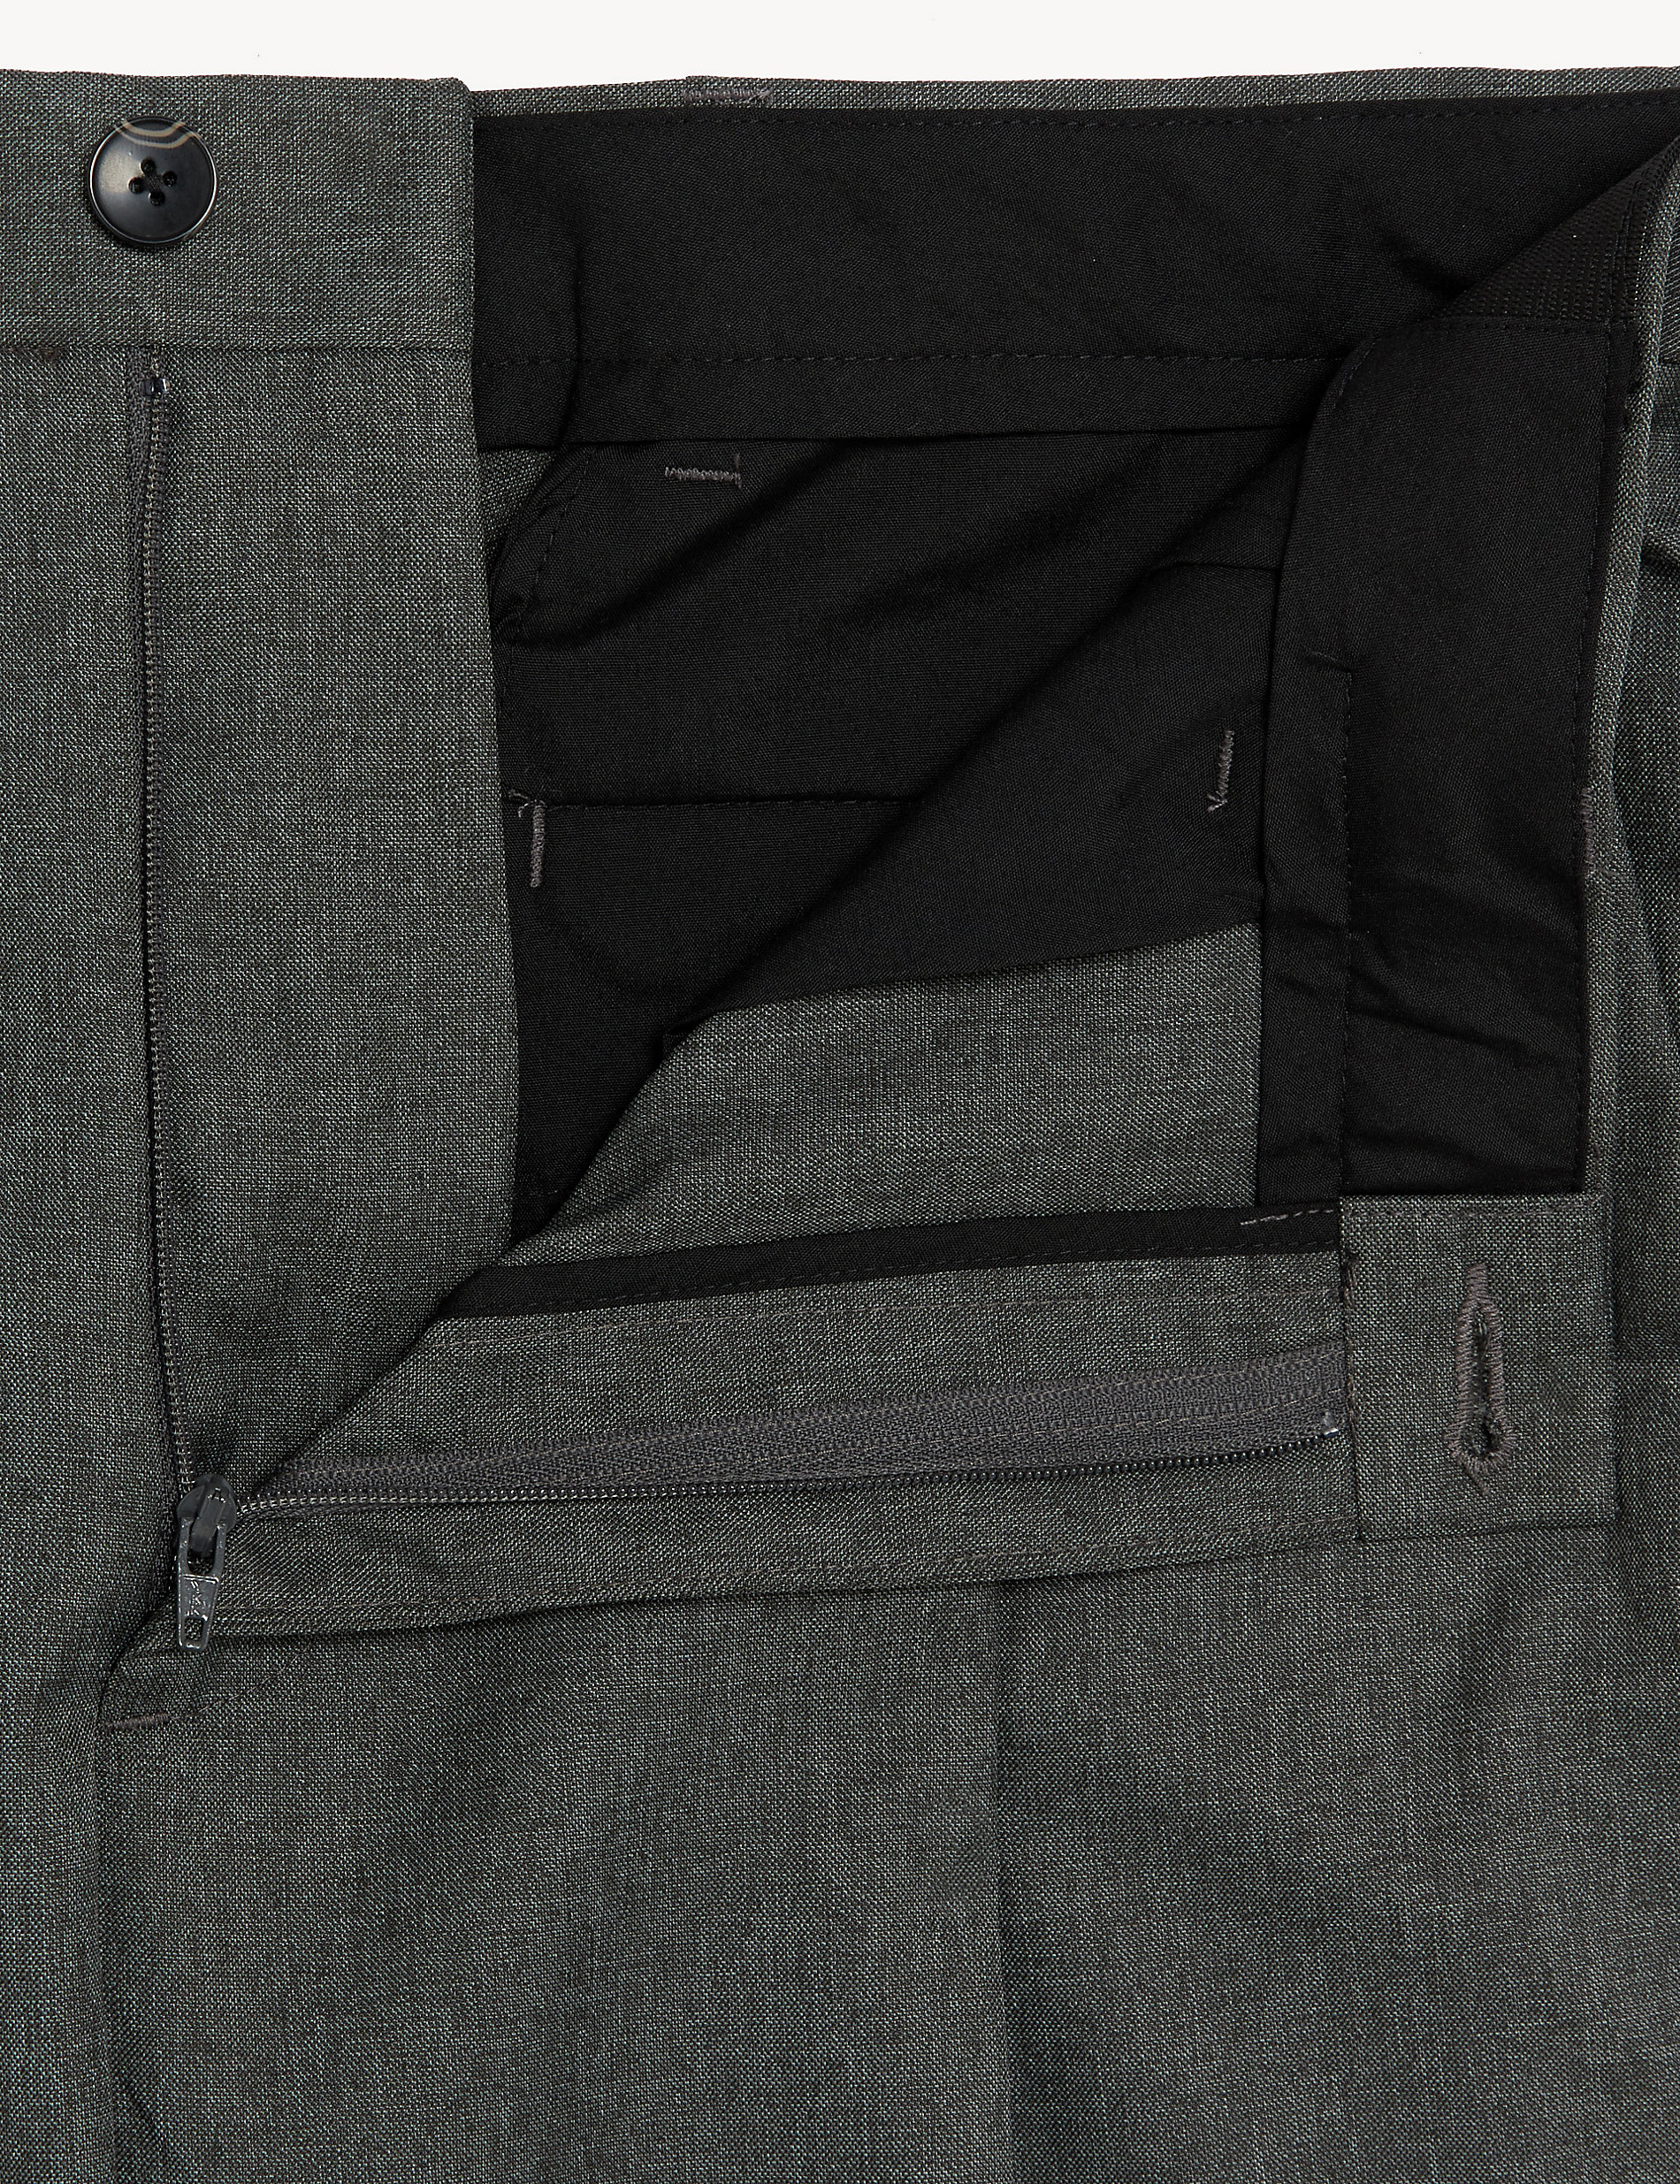 Single Pleat Trousers with Active Waist